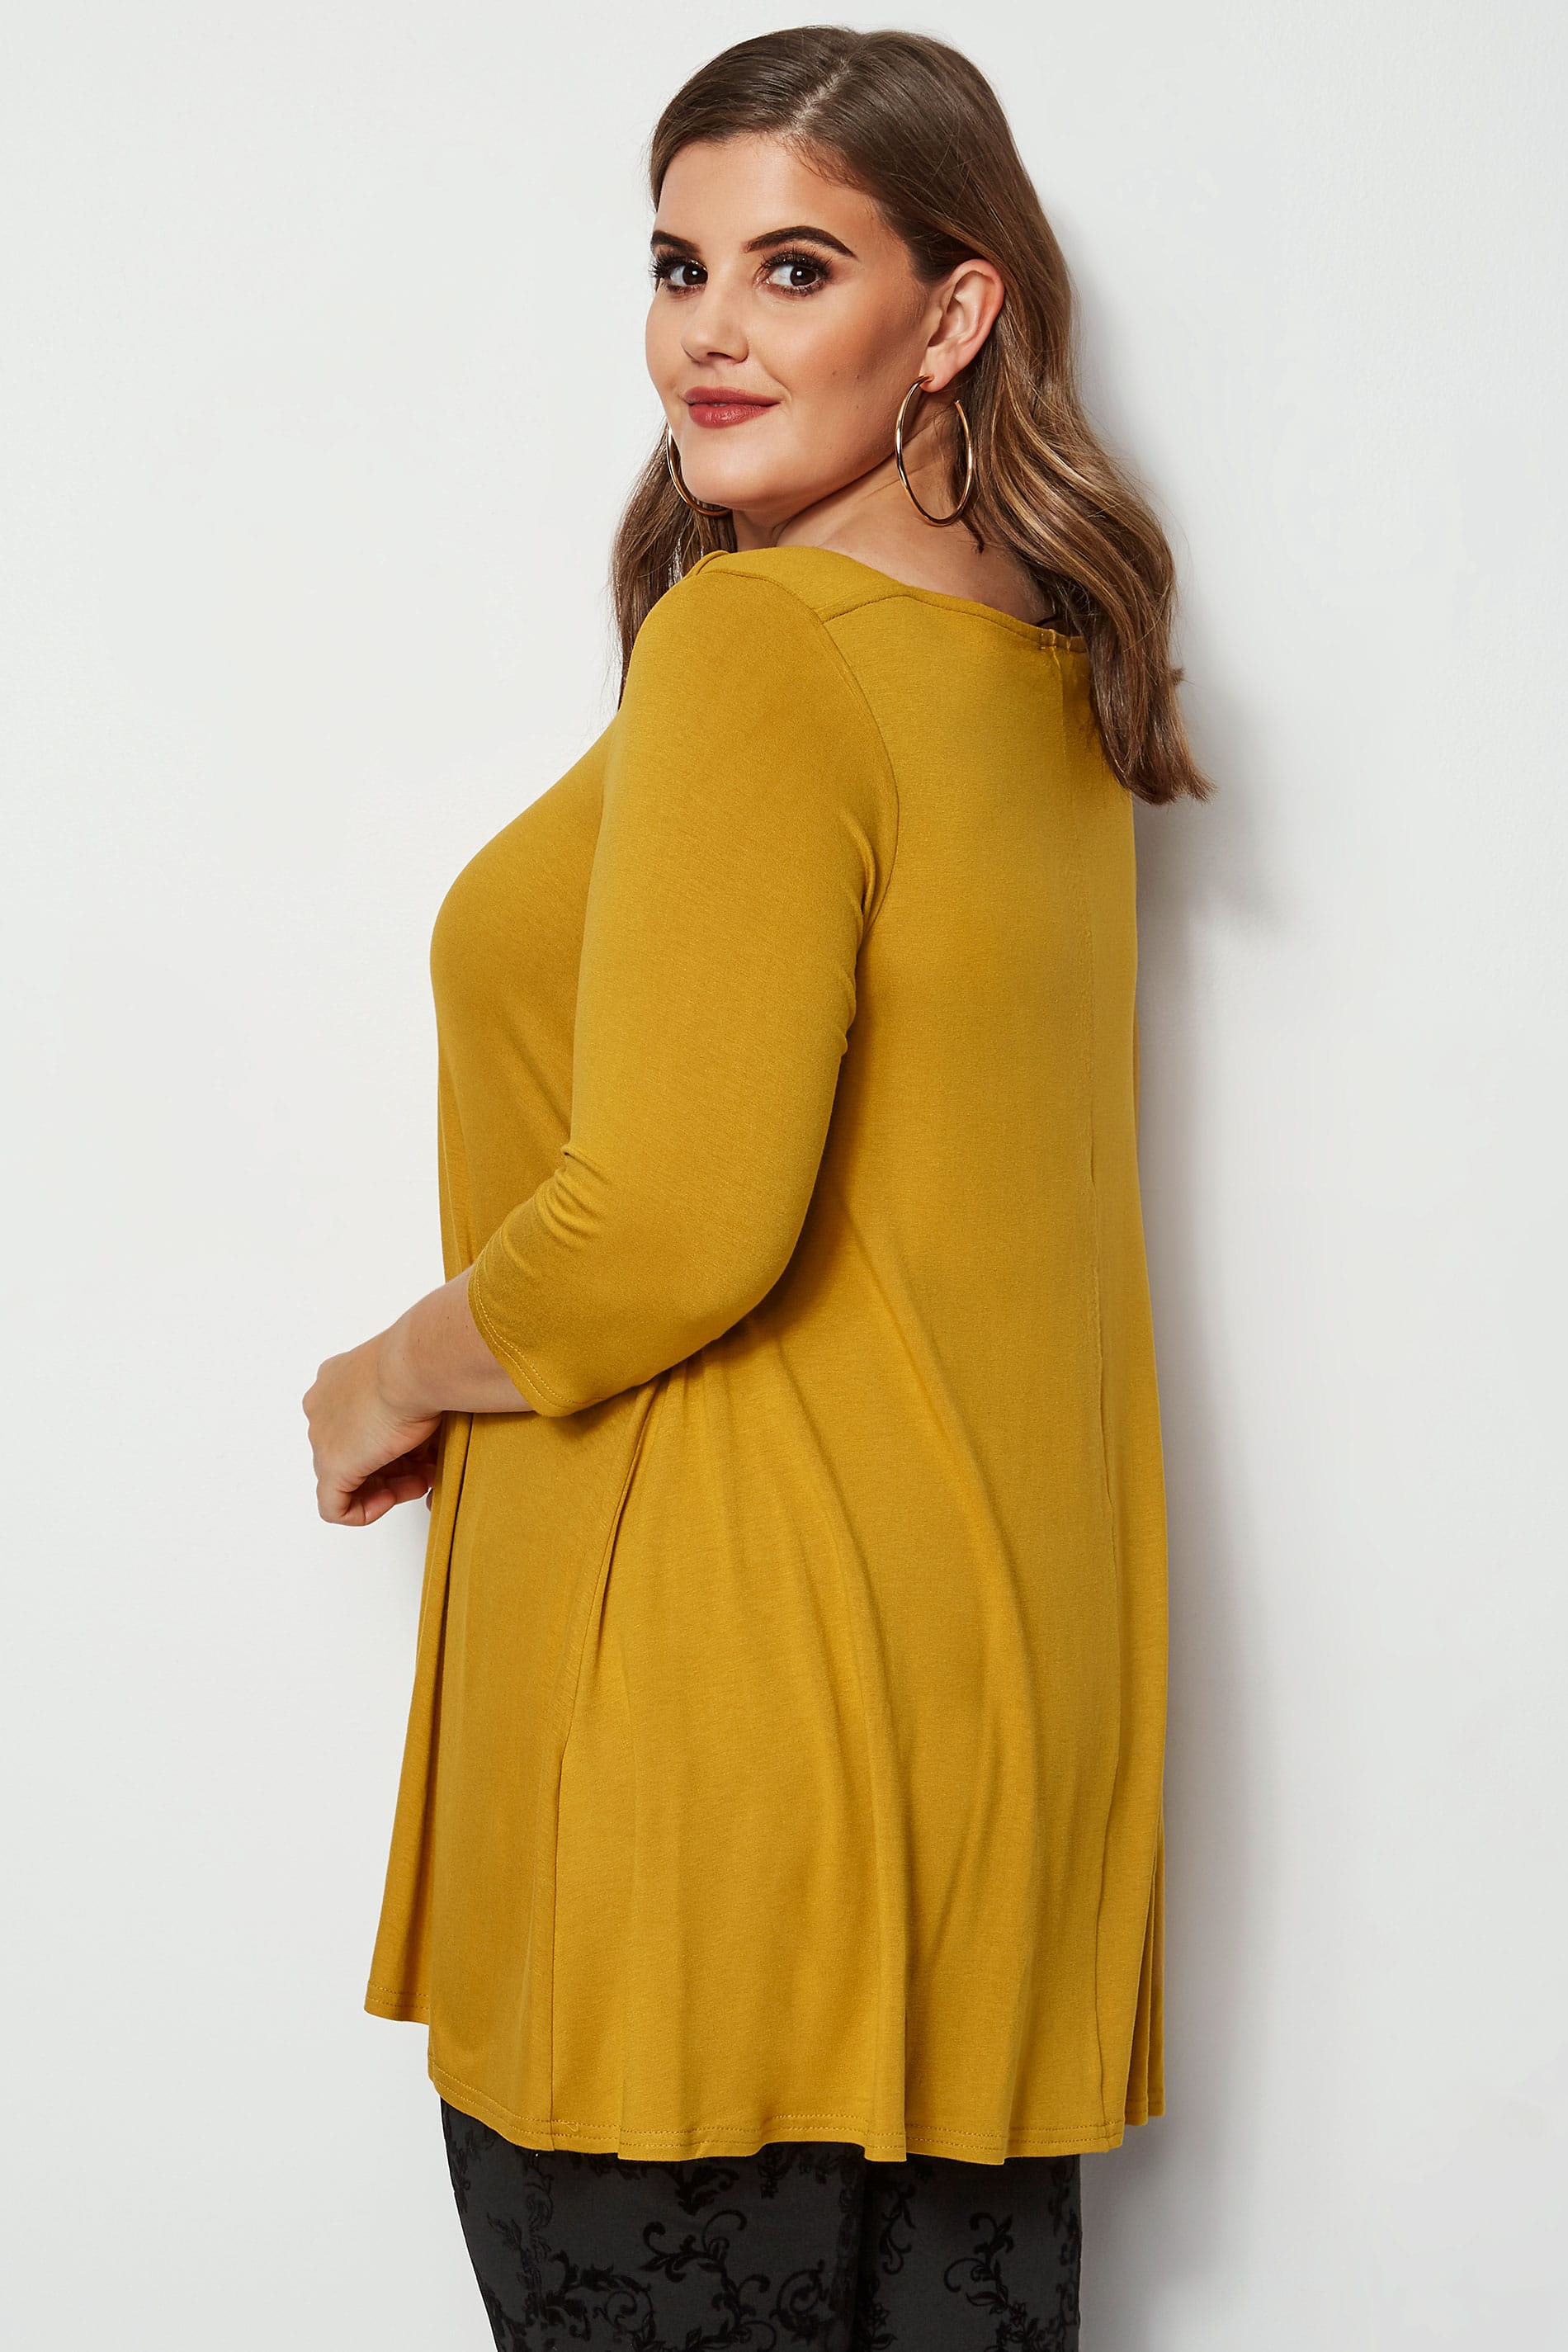 Mustard Longline Top With Envelope Neckline Plus Size 16 To 36